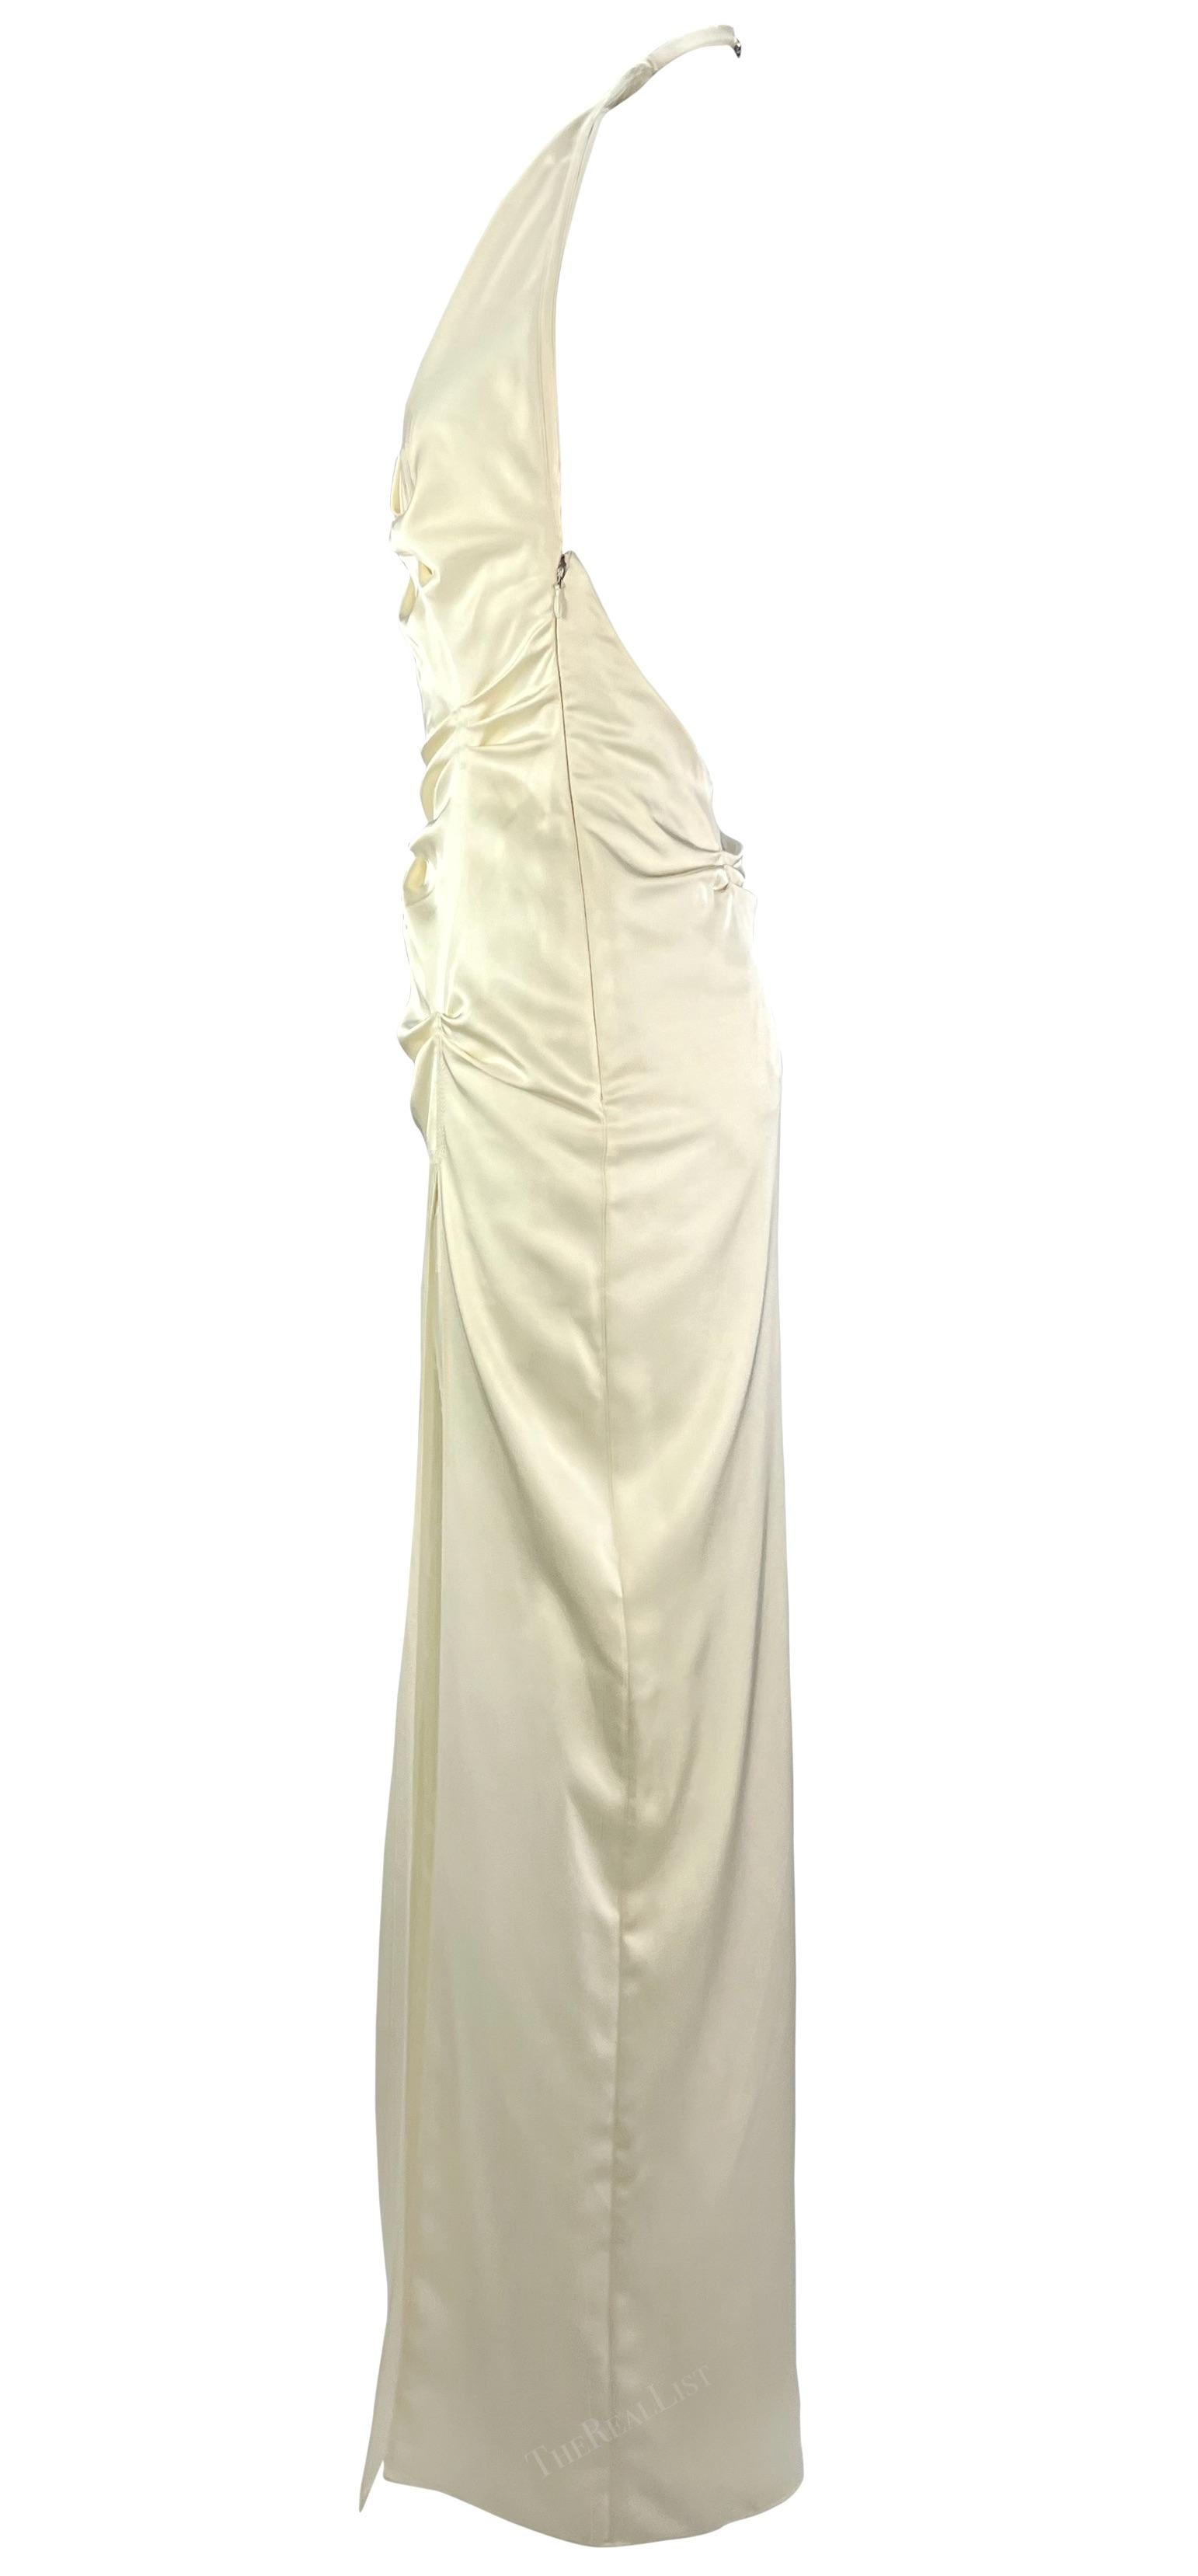 S/S 1999 Gianni Versace by Donatella Ruched Off-White High-Slit Backless Gown 2